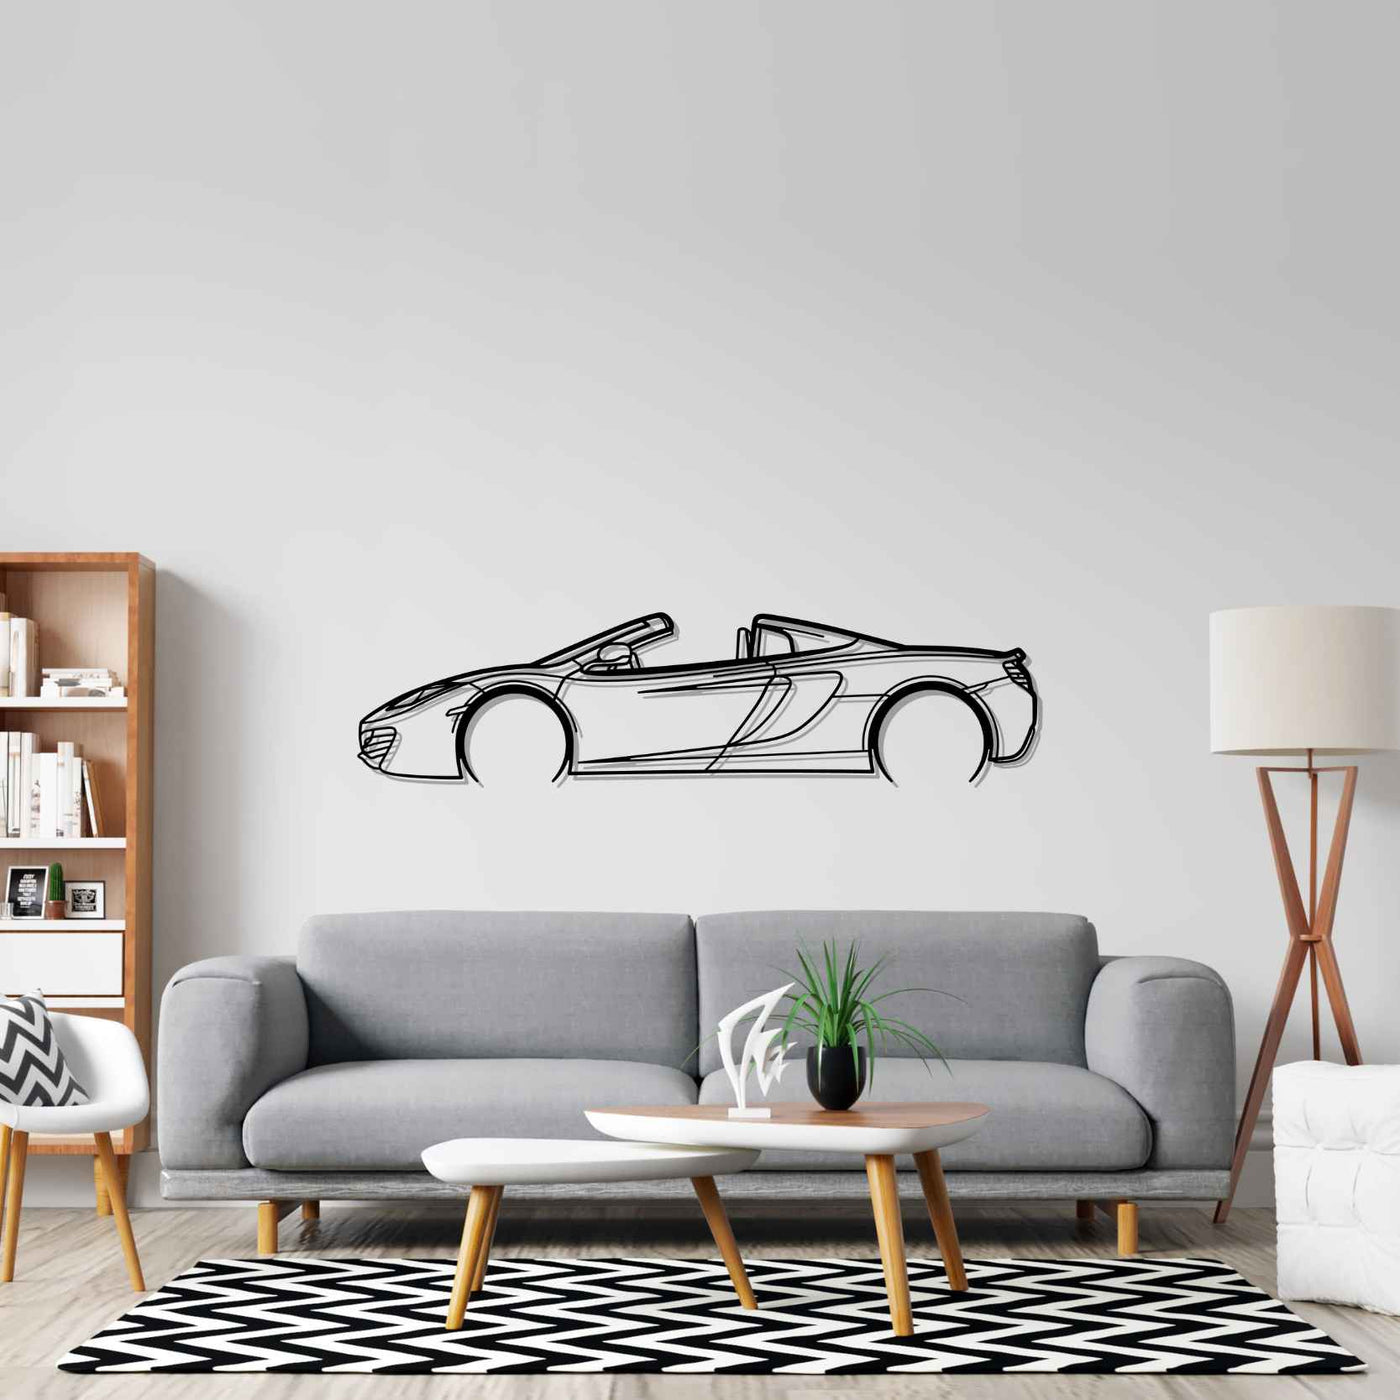 MP4 12C Spider Detailed Silhouette Metal Wall Art